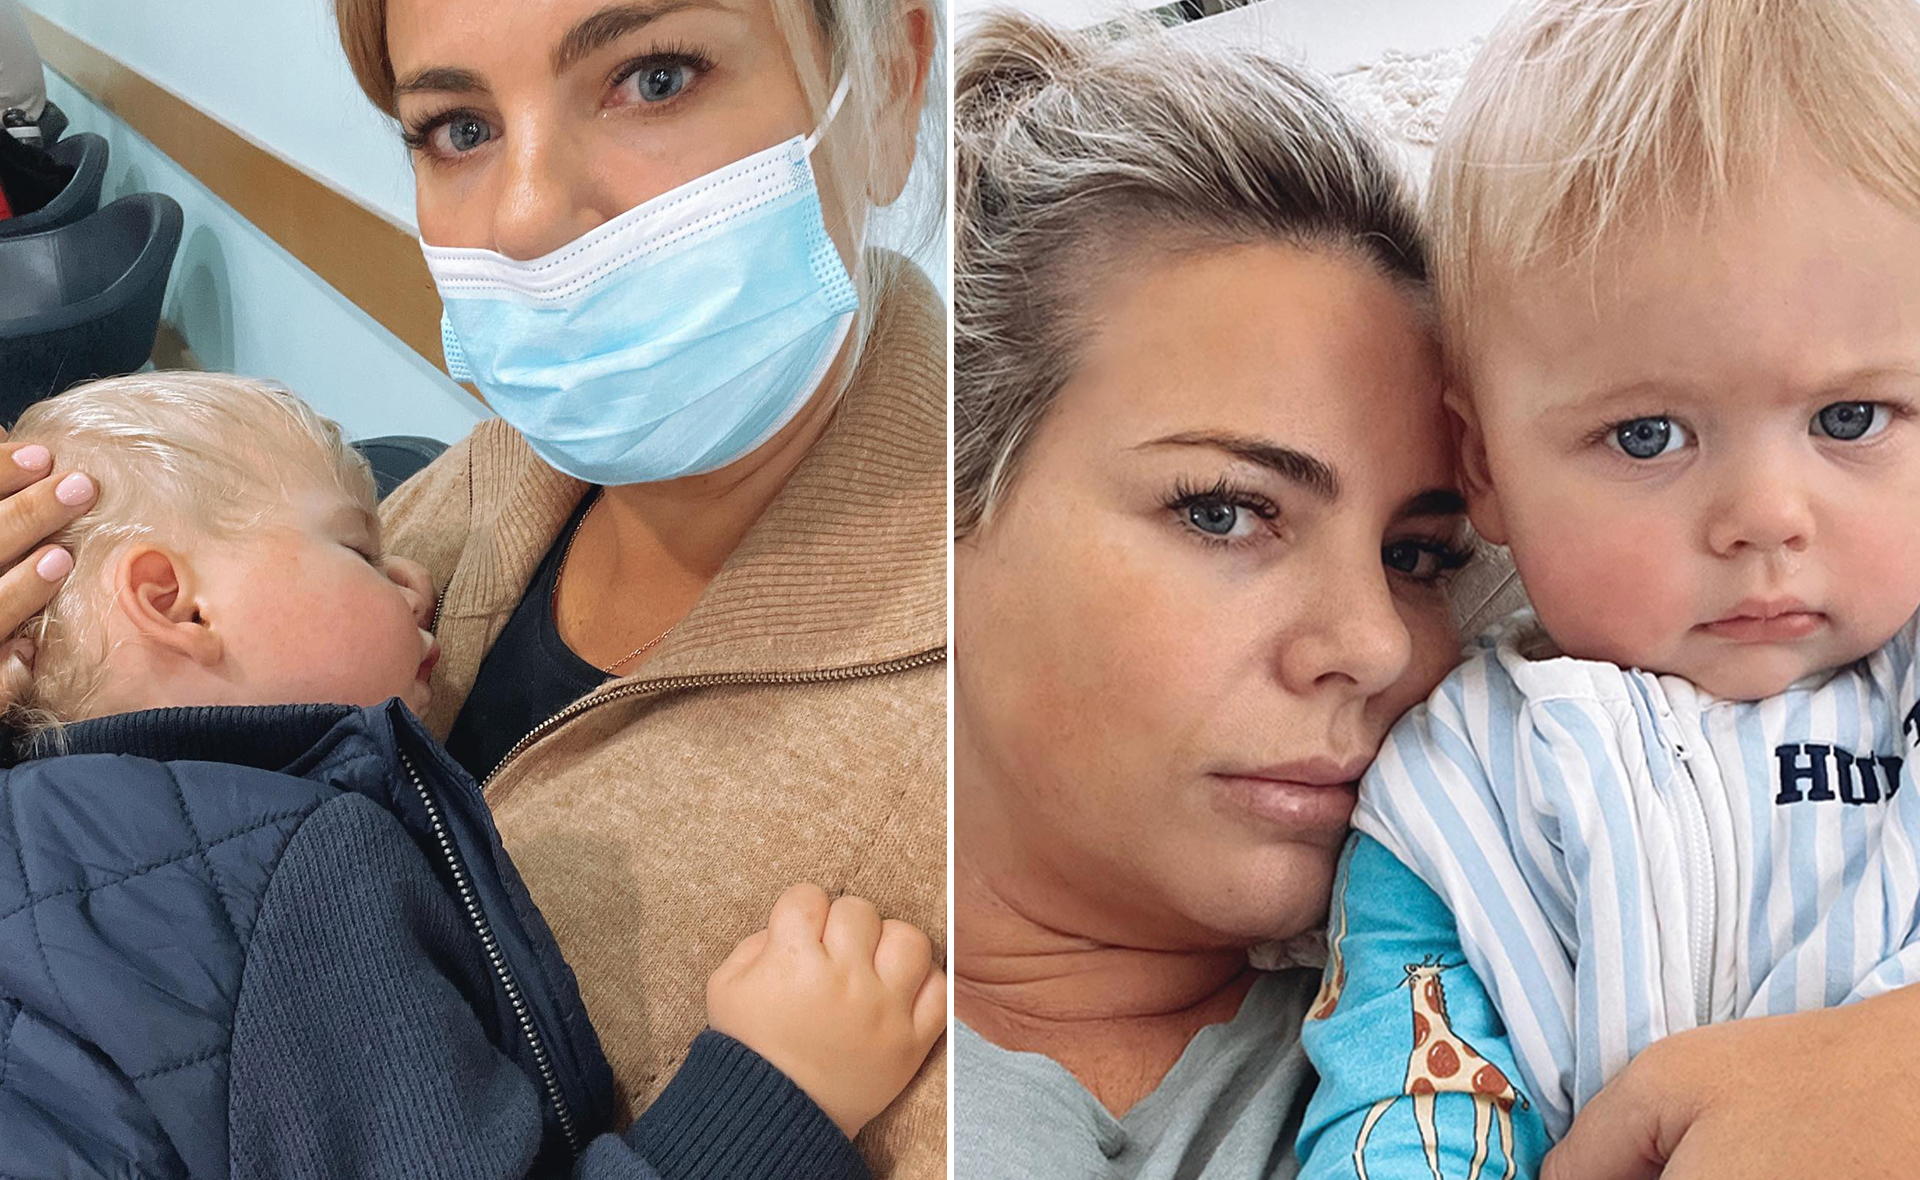 Fiona Falkiner details her “most terrifying moment” as a mother after her son was rushed to hospital